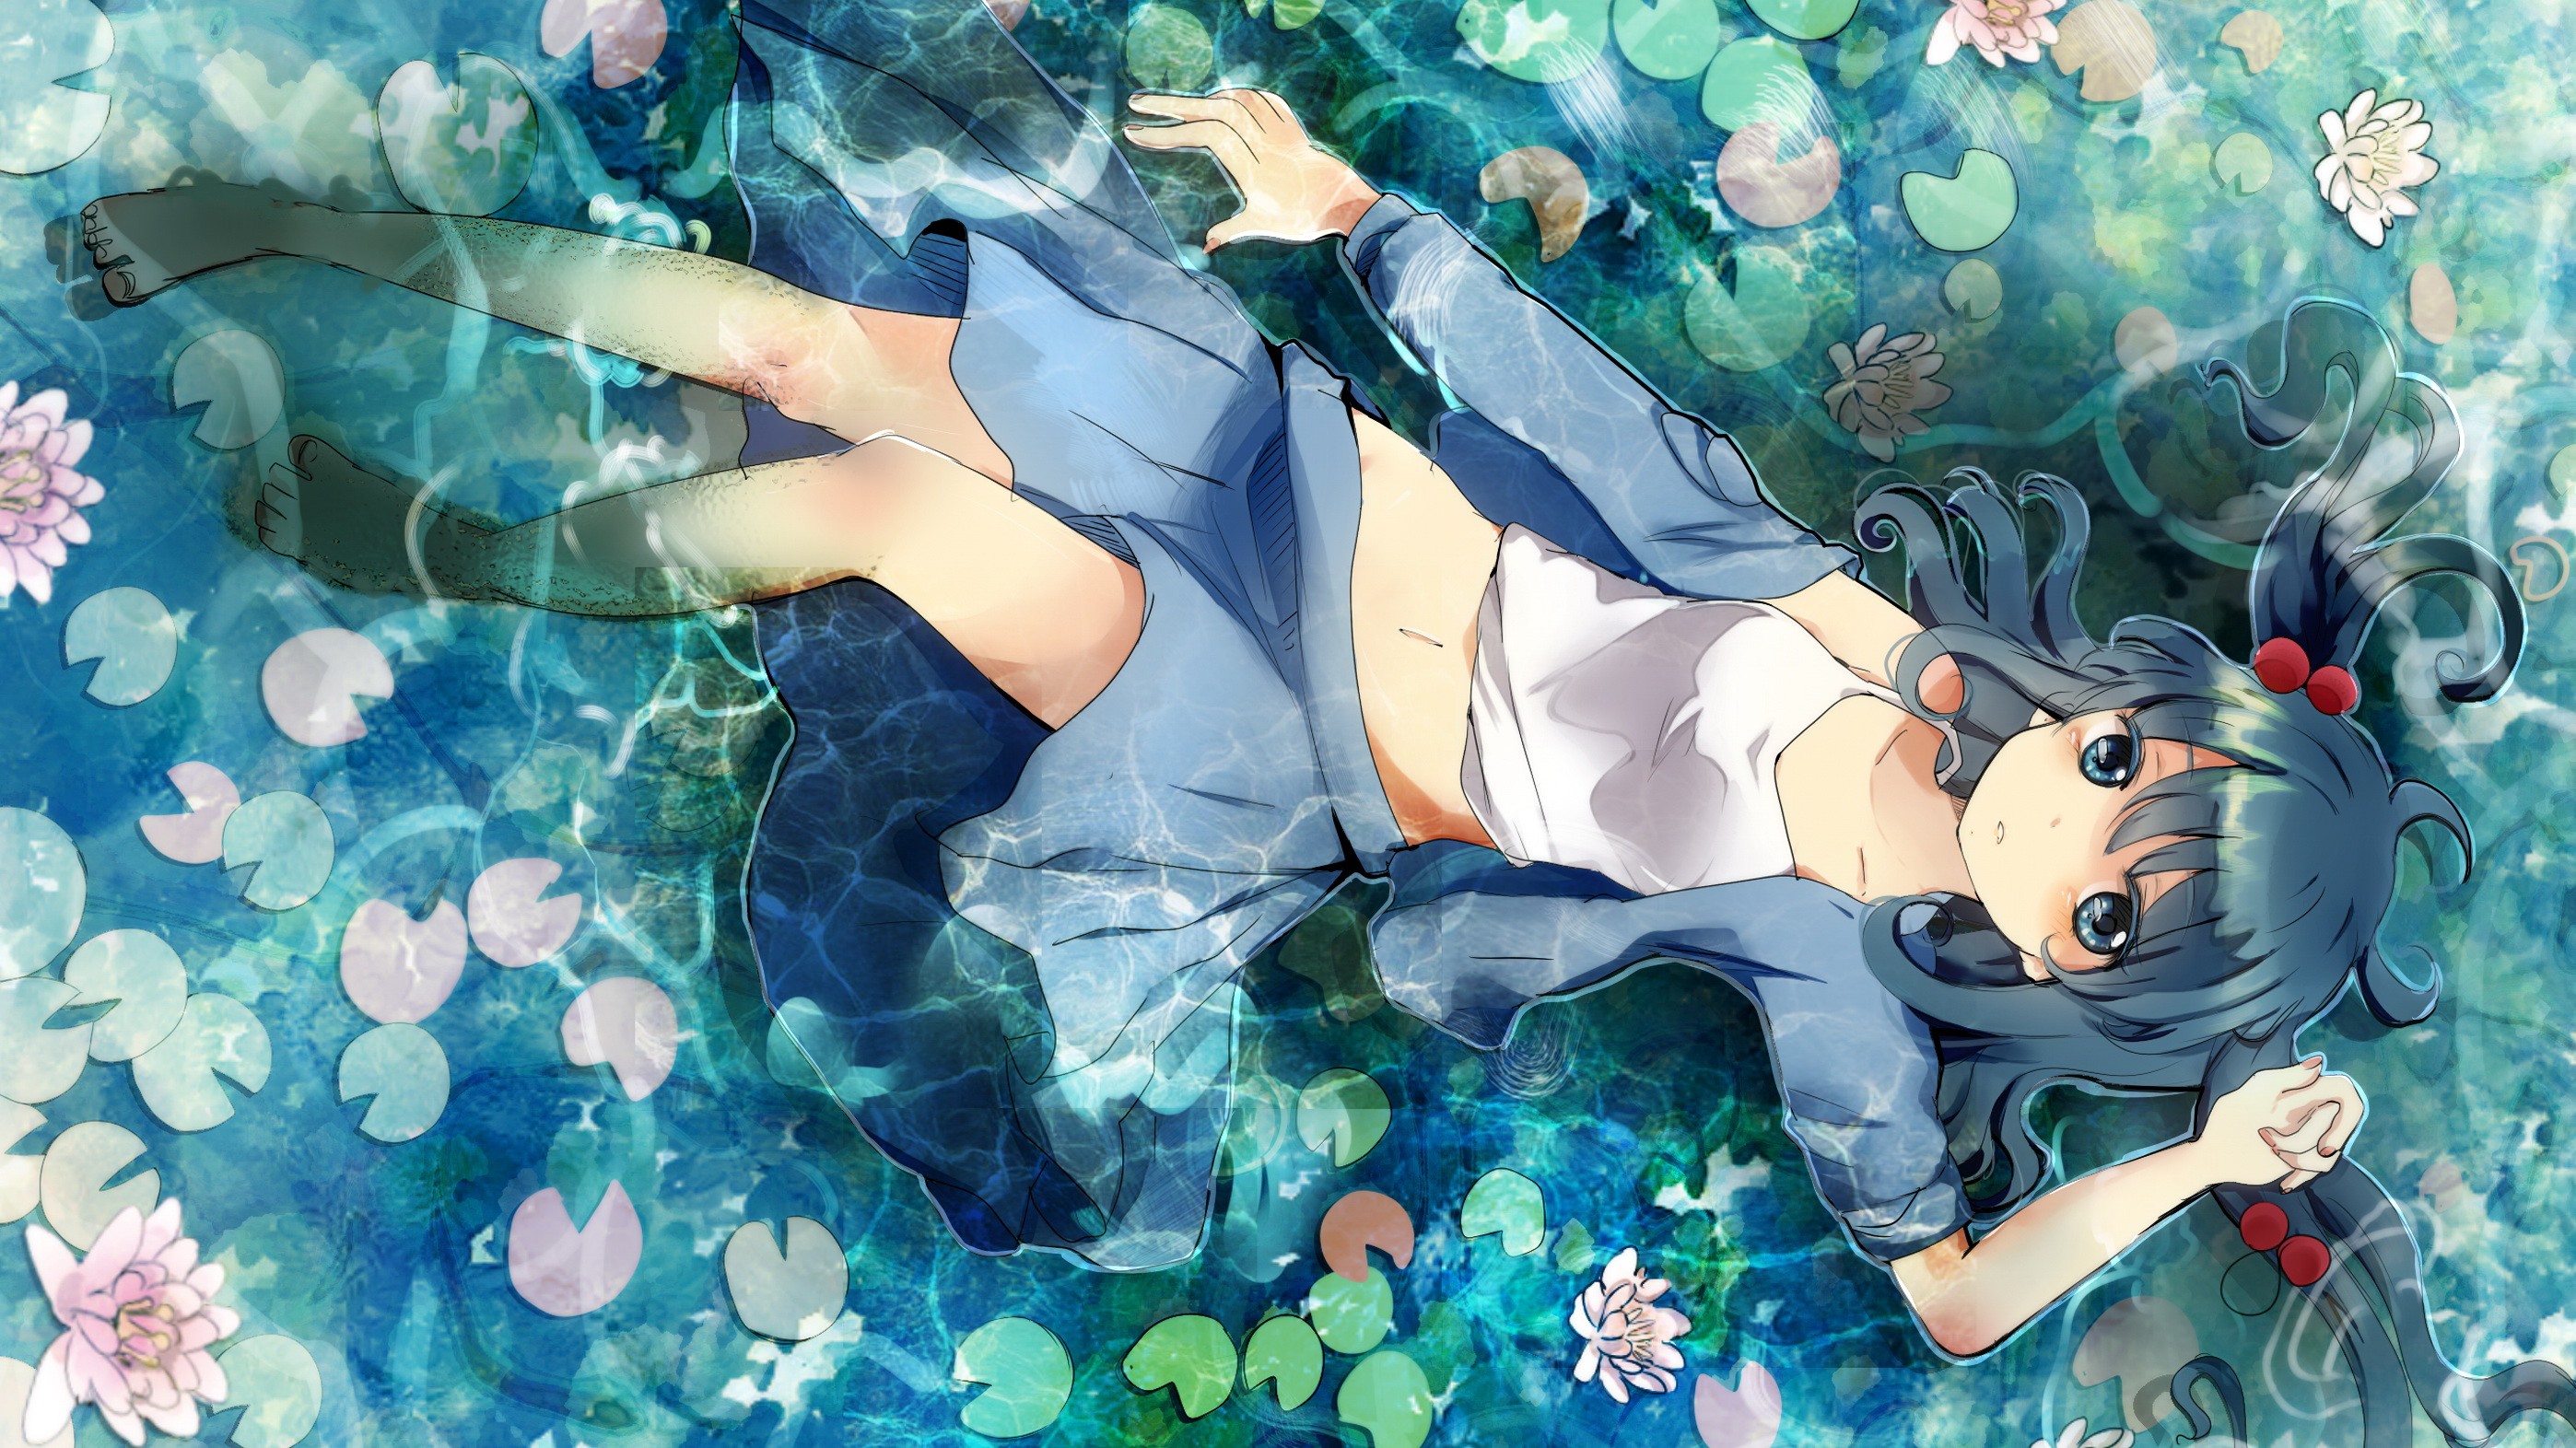 water, Video, Games, Touhou, Flowers, Blue, Eyes, Skirts, Long, Hair, Tank, Tops, Blue, Hair, Barefoot, Twintails, Lying, Down, Navel, Lily, Pads, Kawashiro, Nitori, Kappa, Hair, Ornaments, Open, Clothes Wallpaper